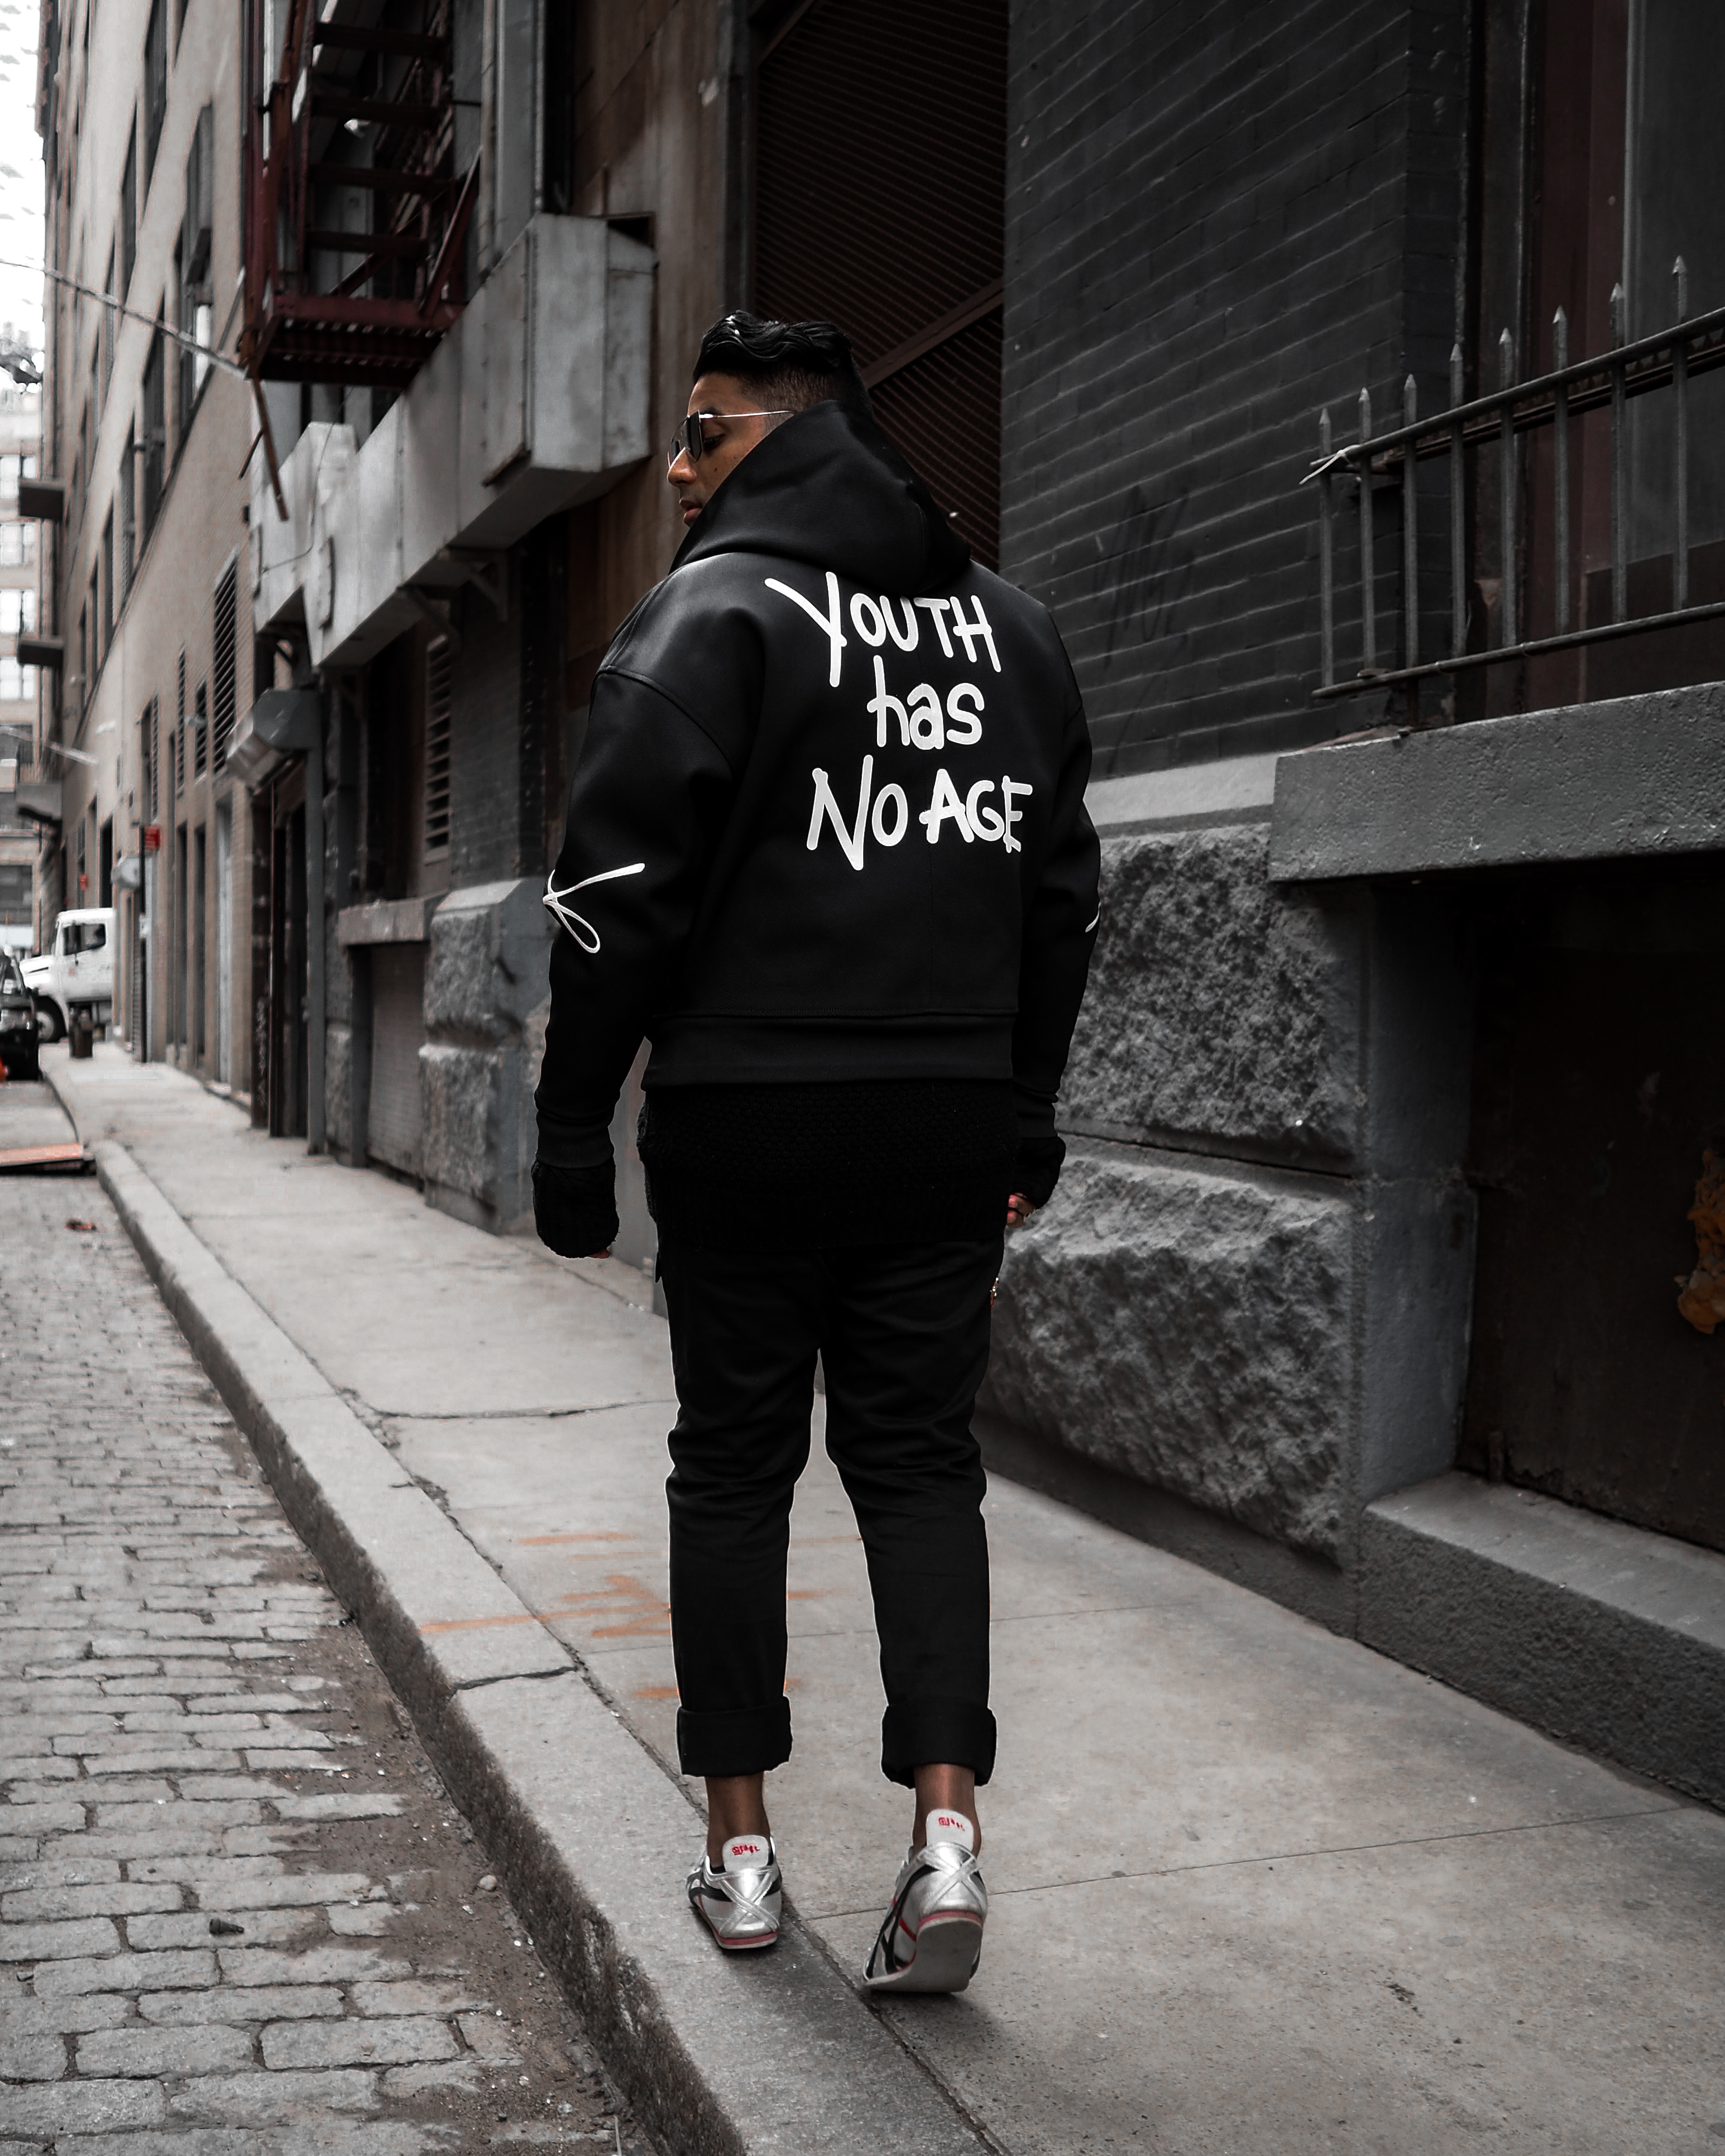 ENDOXIST | Street Style | New York | Manhattan Style | Youth Has No Age | March Madness | Xian Zone | NYFW